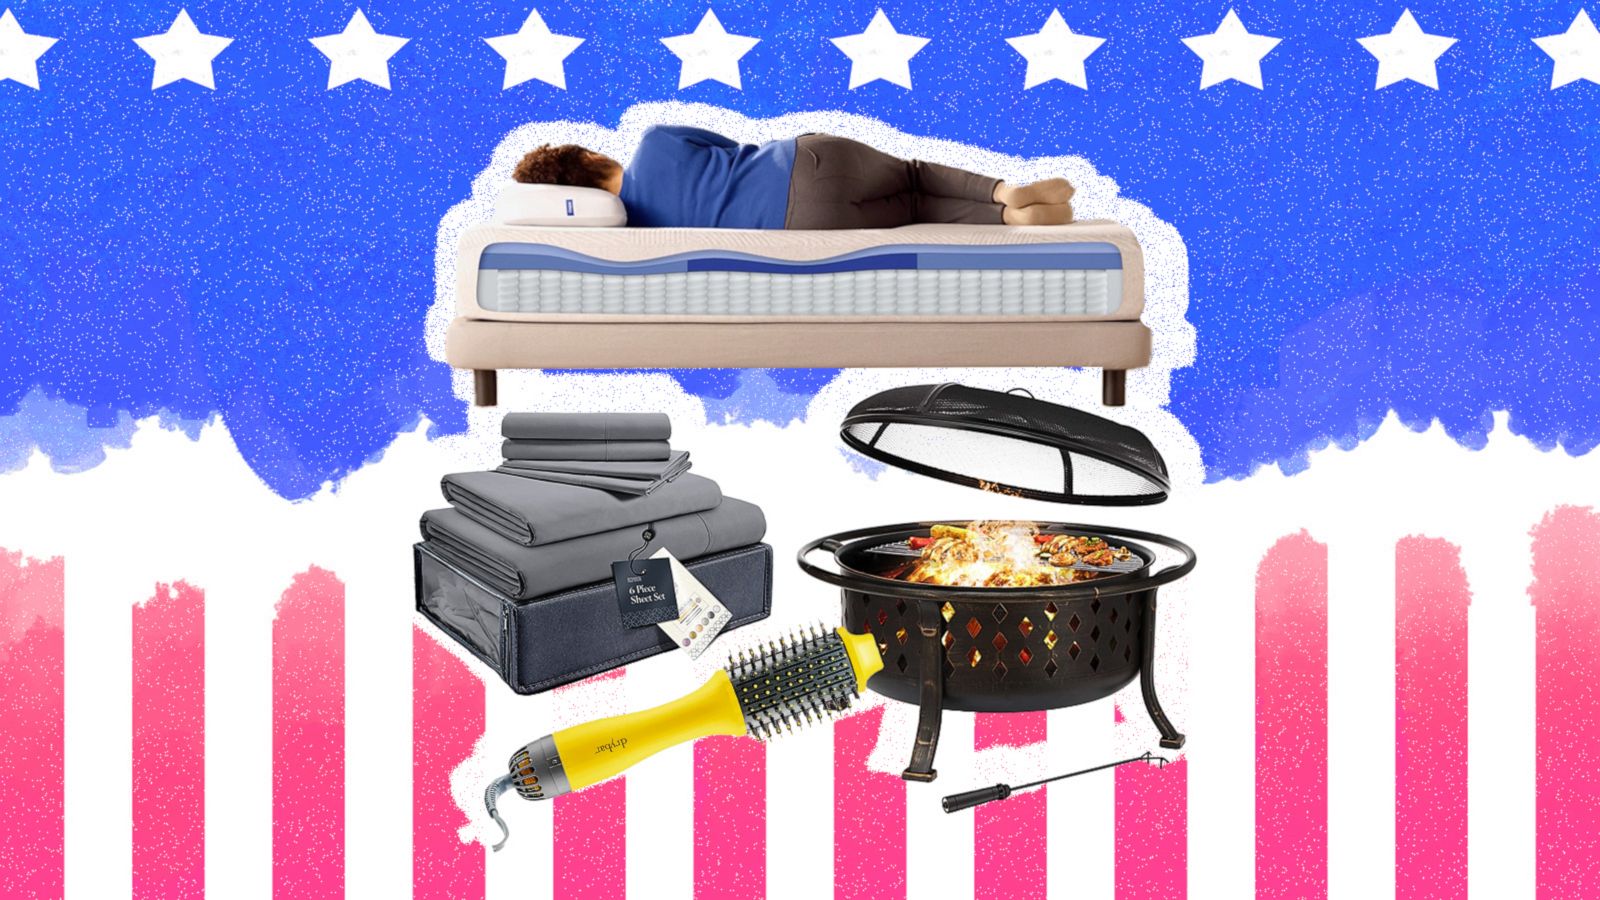 💥 10% off 💥 The 4th of July 🗽🎆Clearance! - Overstock